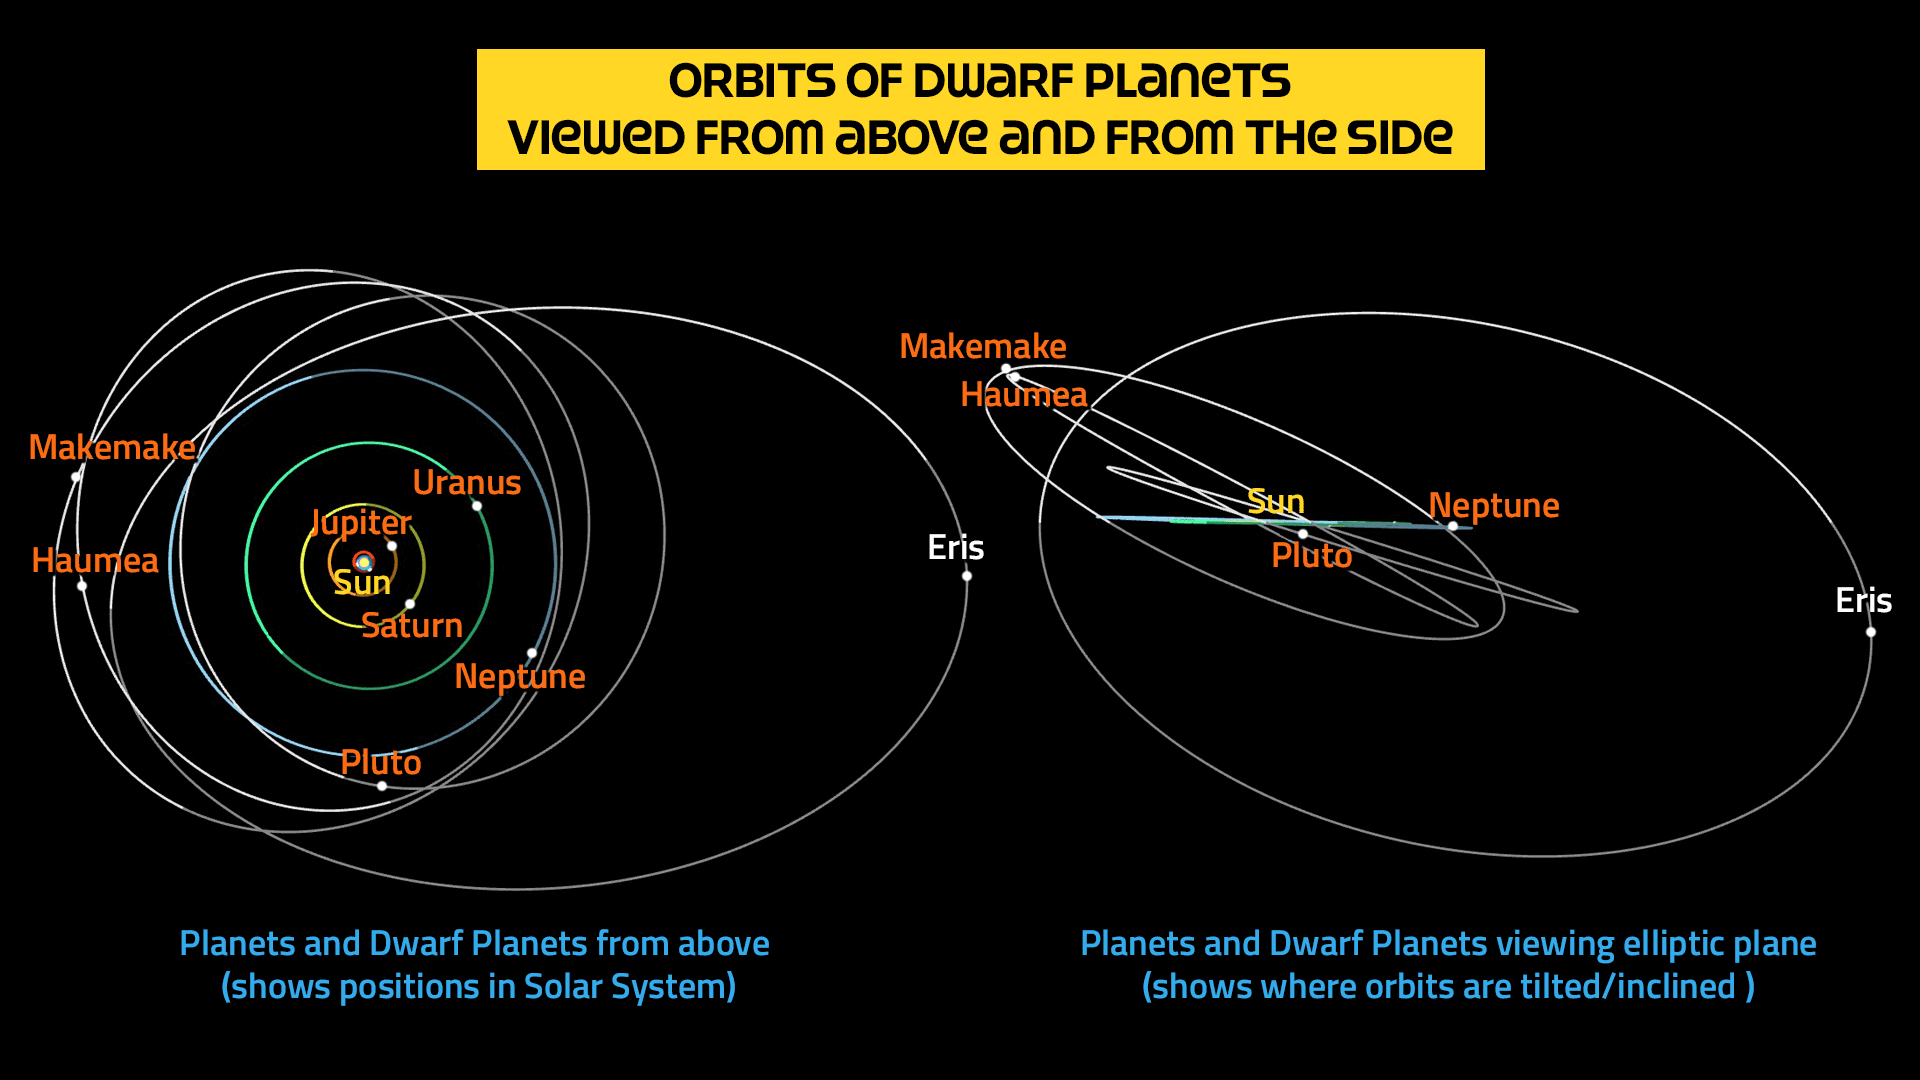 Orbit of Eris and the Dwarf Planets